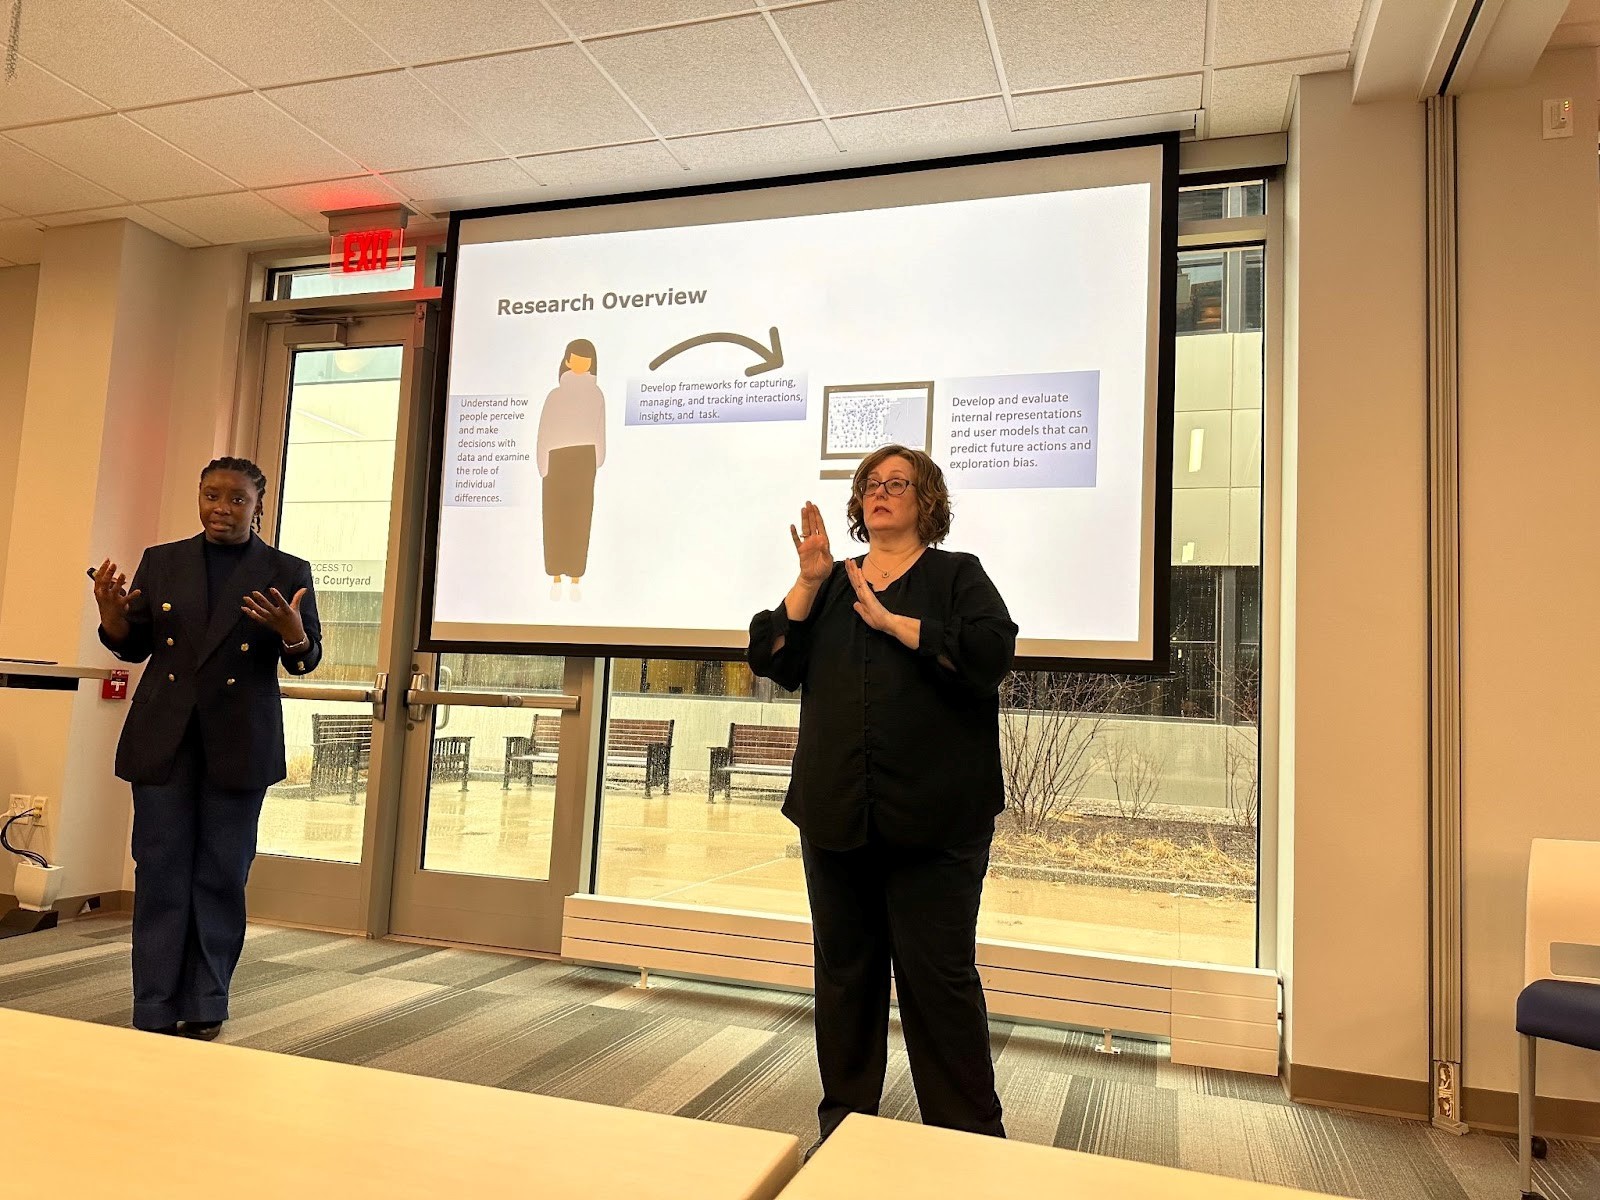 Alvitta Ottley stands during her presentation. Her slides, to the right of her, show a person with an arrow pointing to text. To the right of the slides is an ASL interpreter.